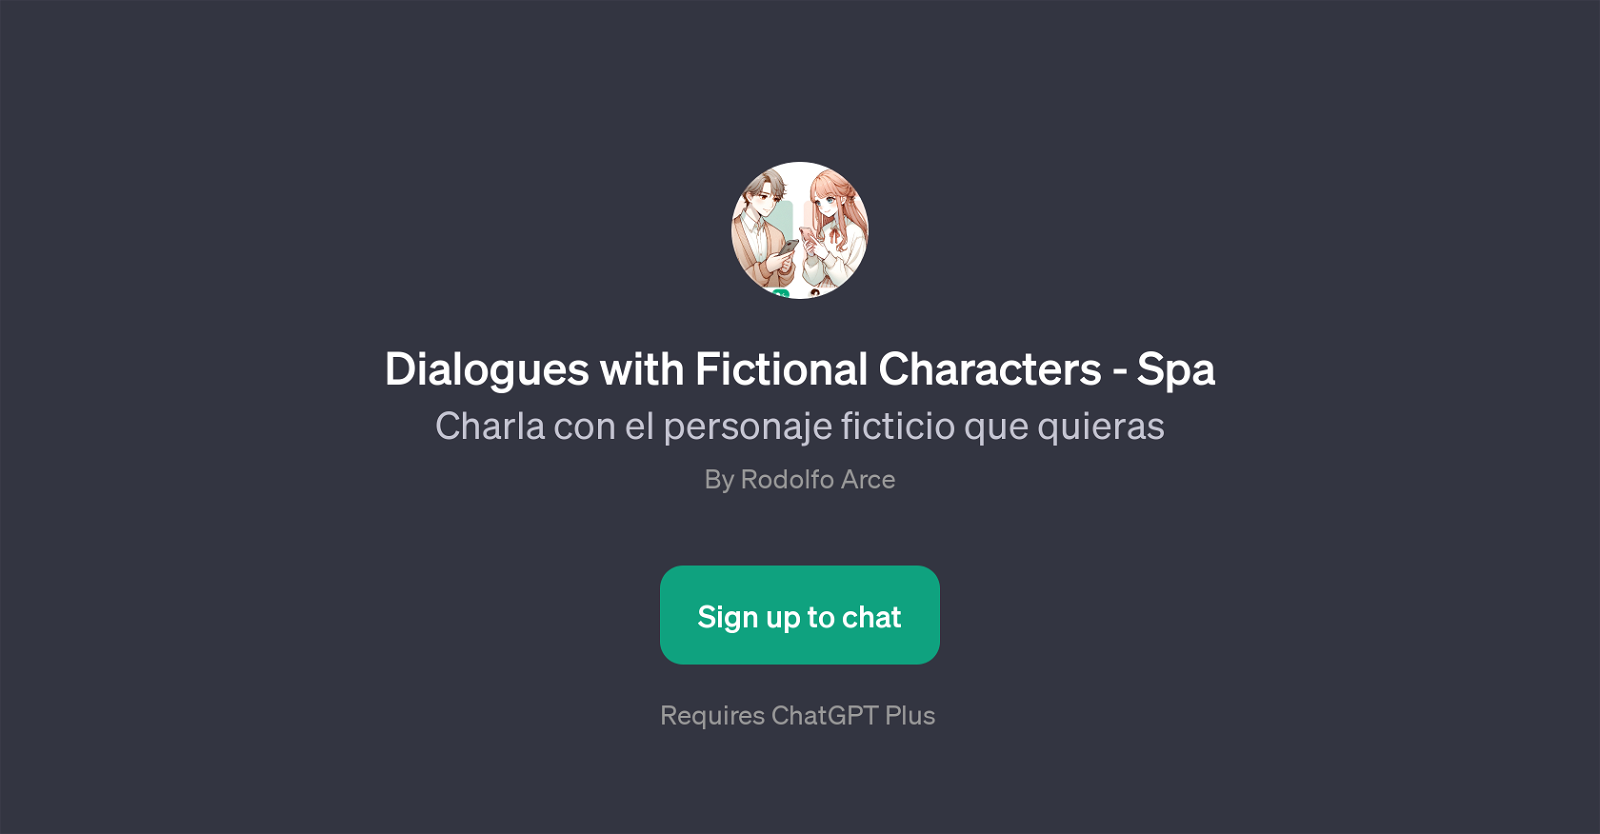 Dialogues with Fictional Characters - Spa website